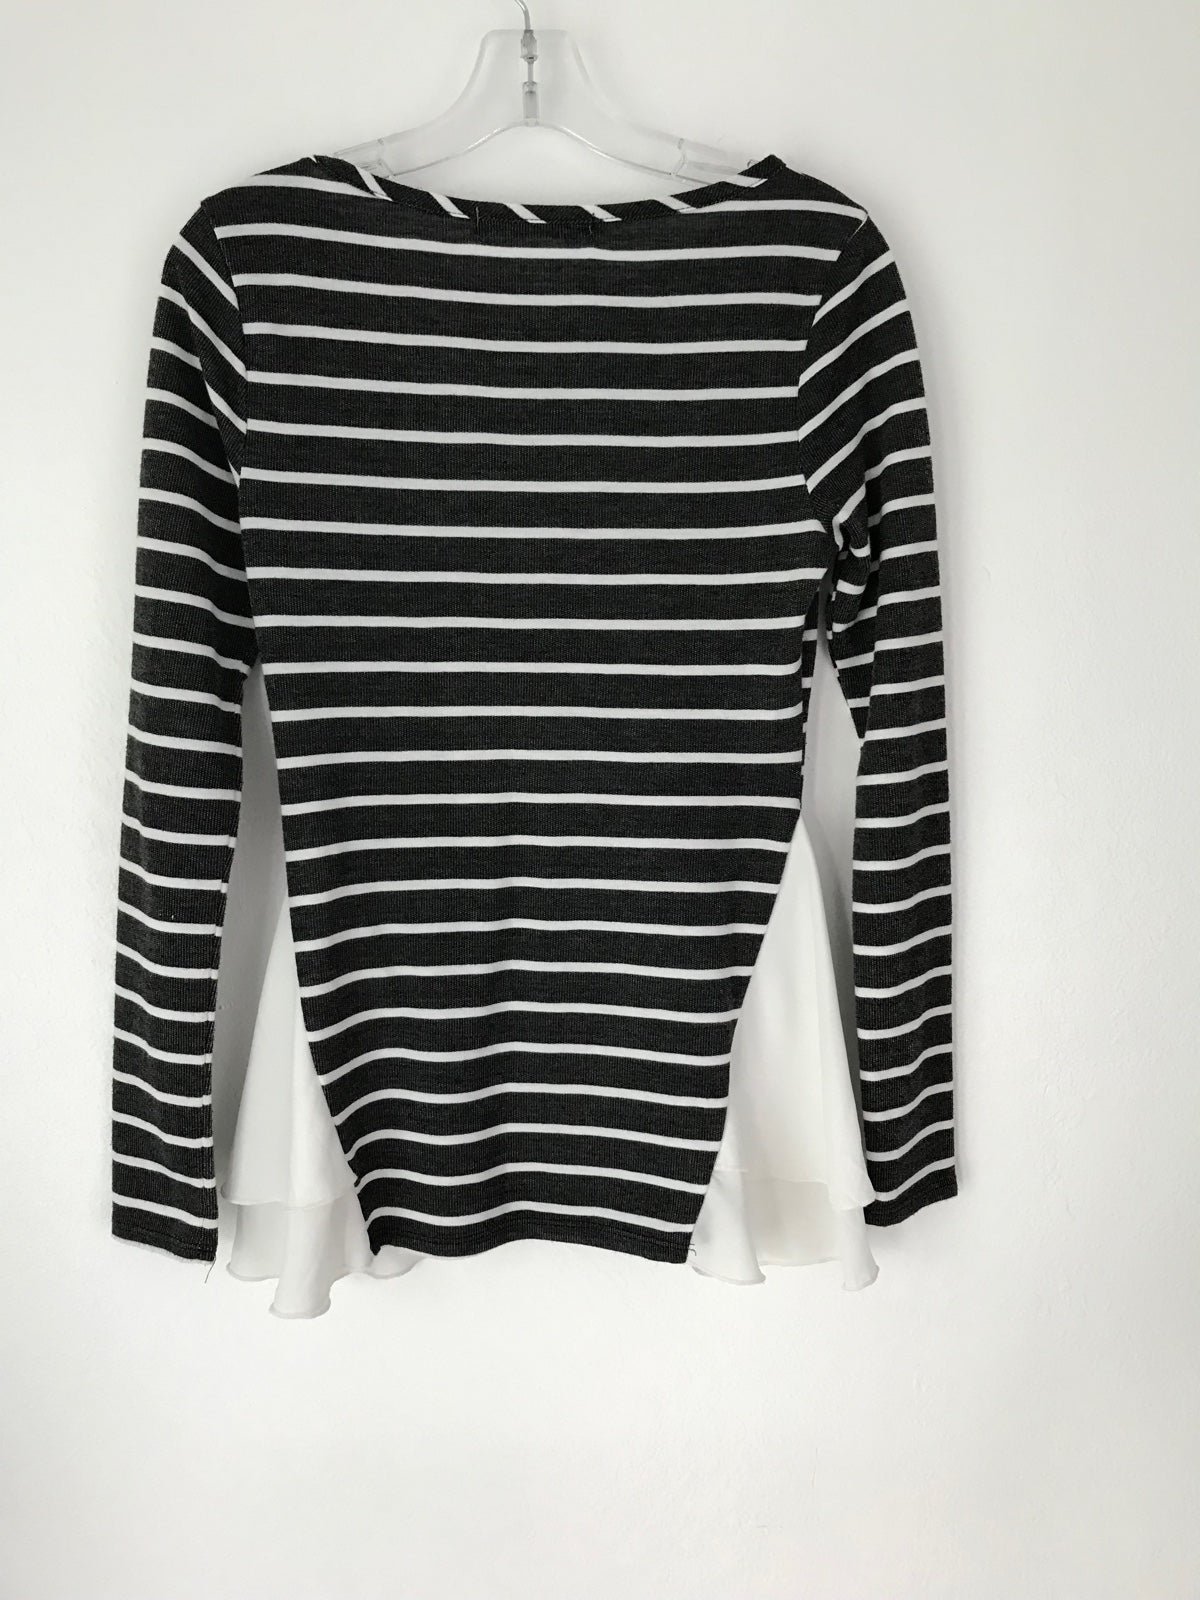 high discount Knit top striped long sleeve gray white women’s fits size small ippI1B0EG Online Shop